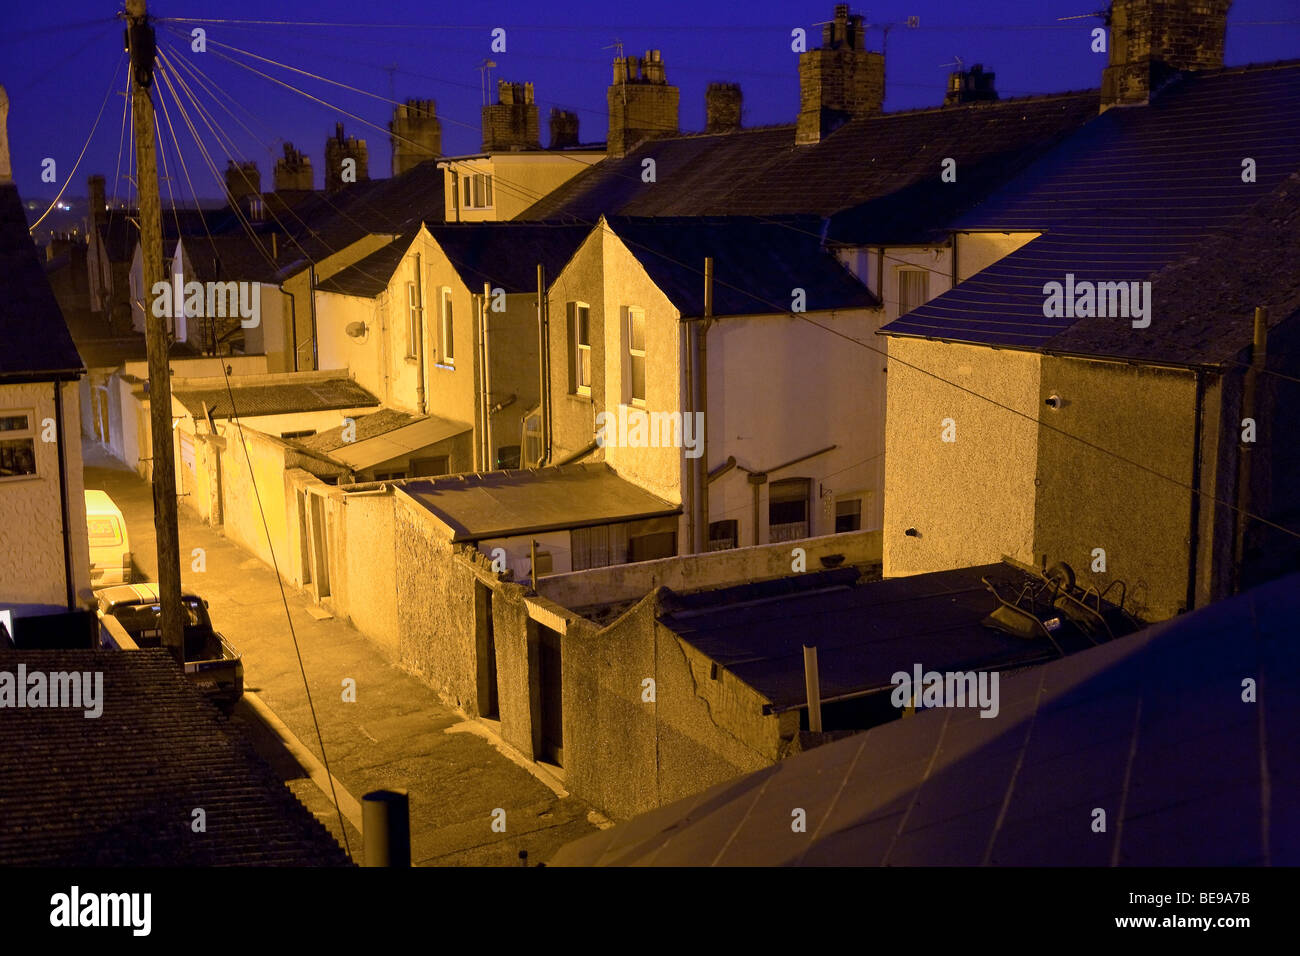 The backs of houses and rear entrances from an alley at night, lit by sodium lights, in Ulverston Cumbria UK Stock Photo